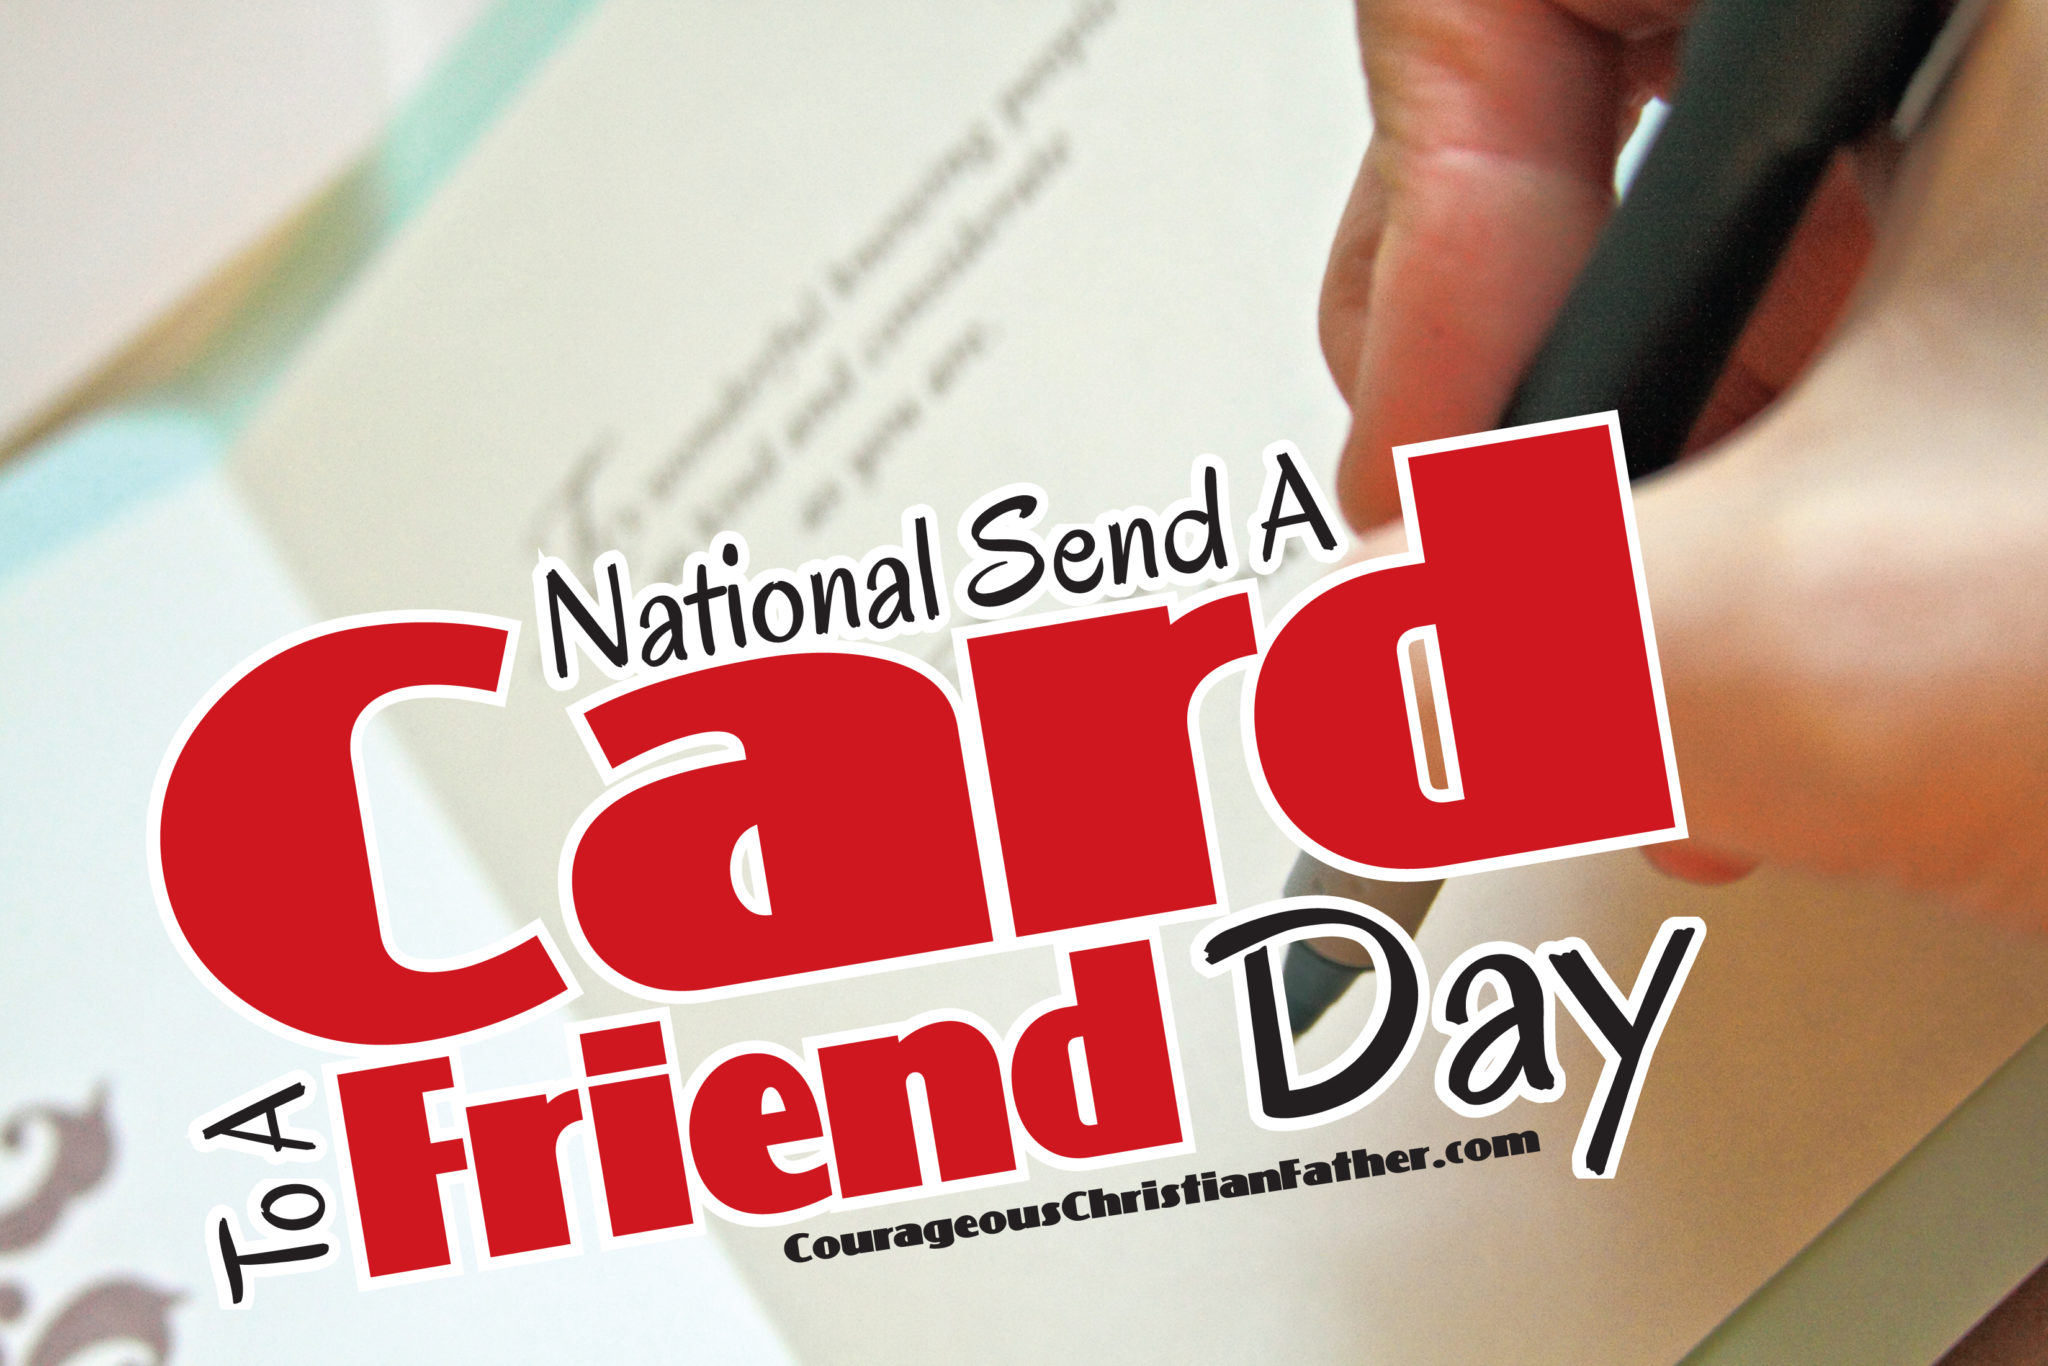 National Send A Card To A Friend Day